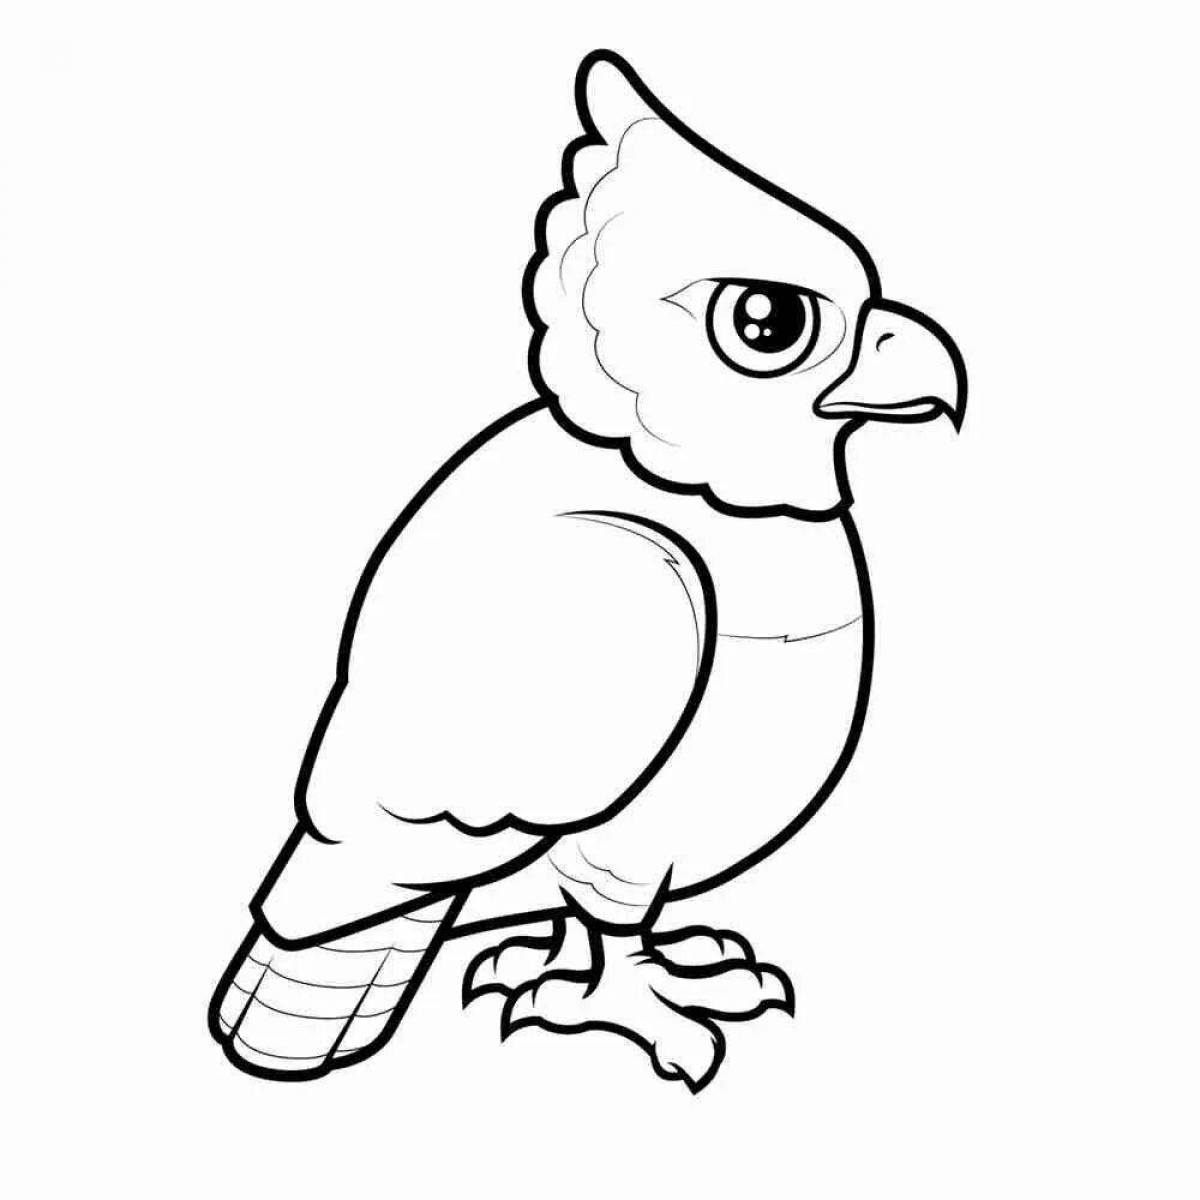 Great eagle coloring page